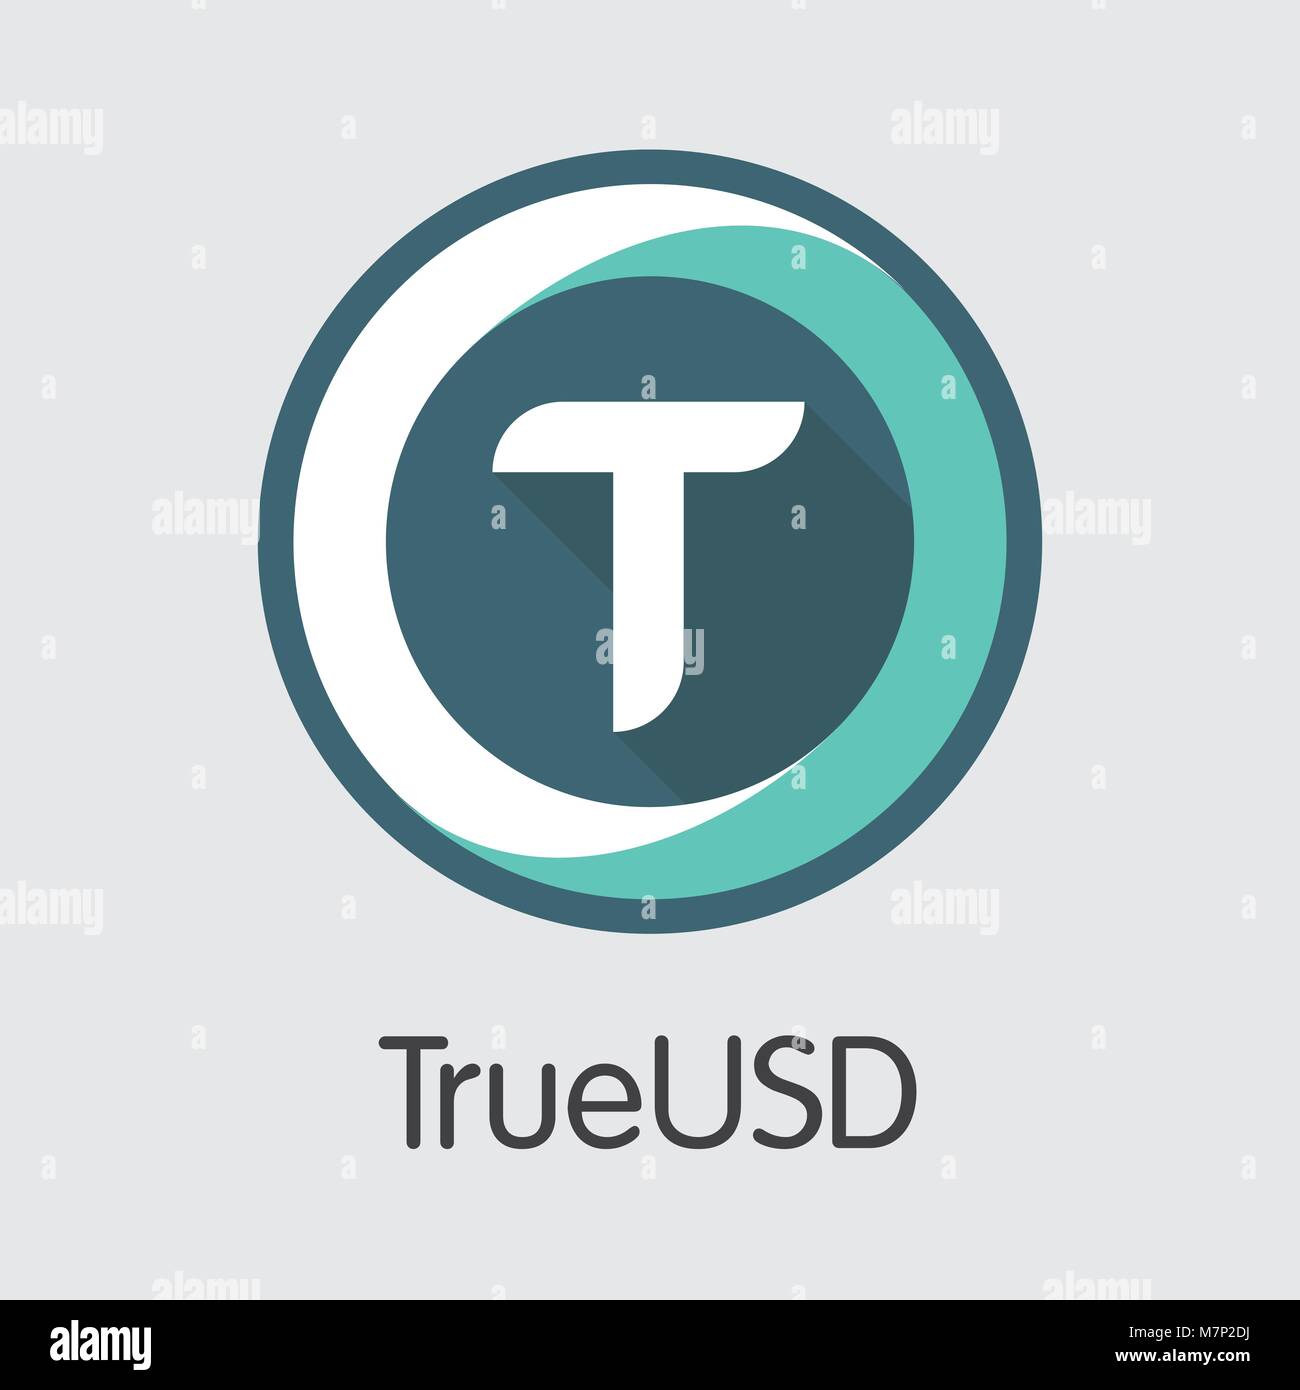 Trueusd Cryptographic Currency - Vector Icon. Stock Vector